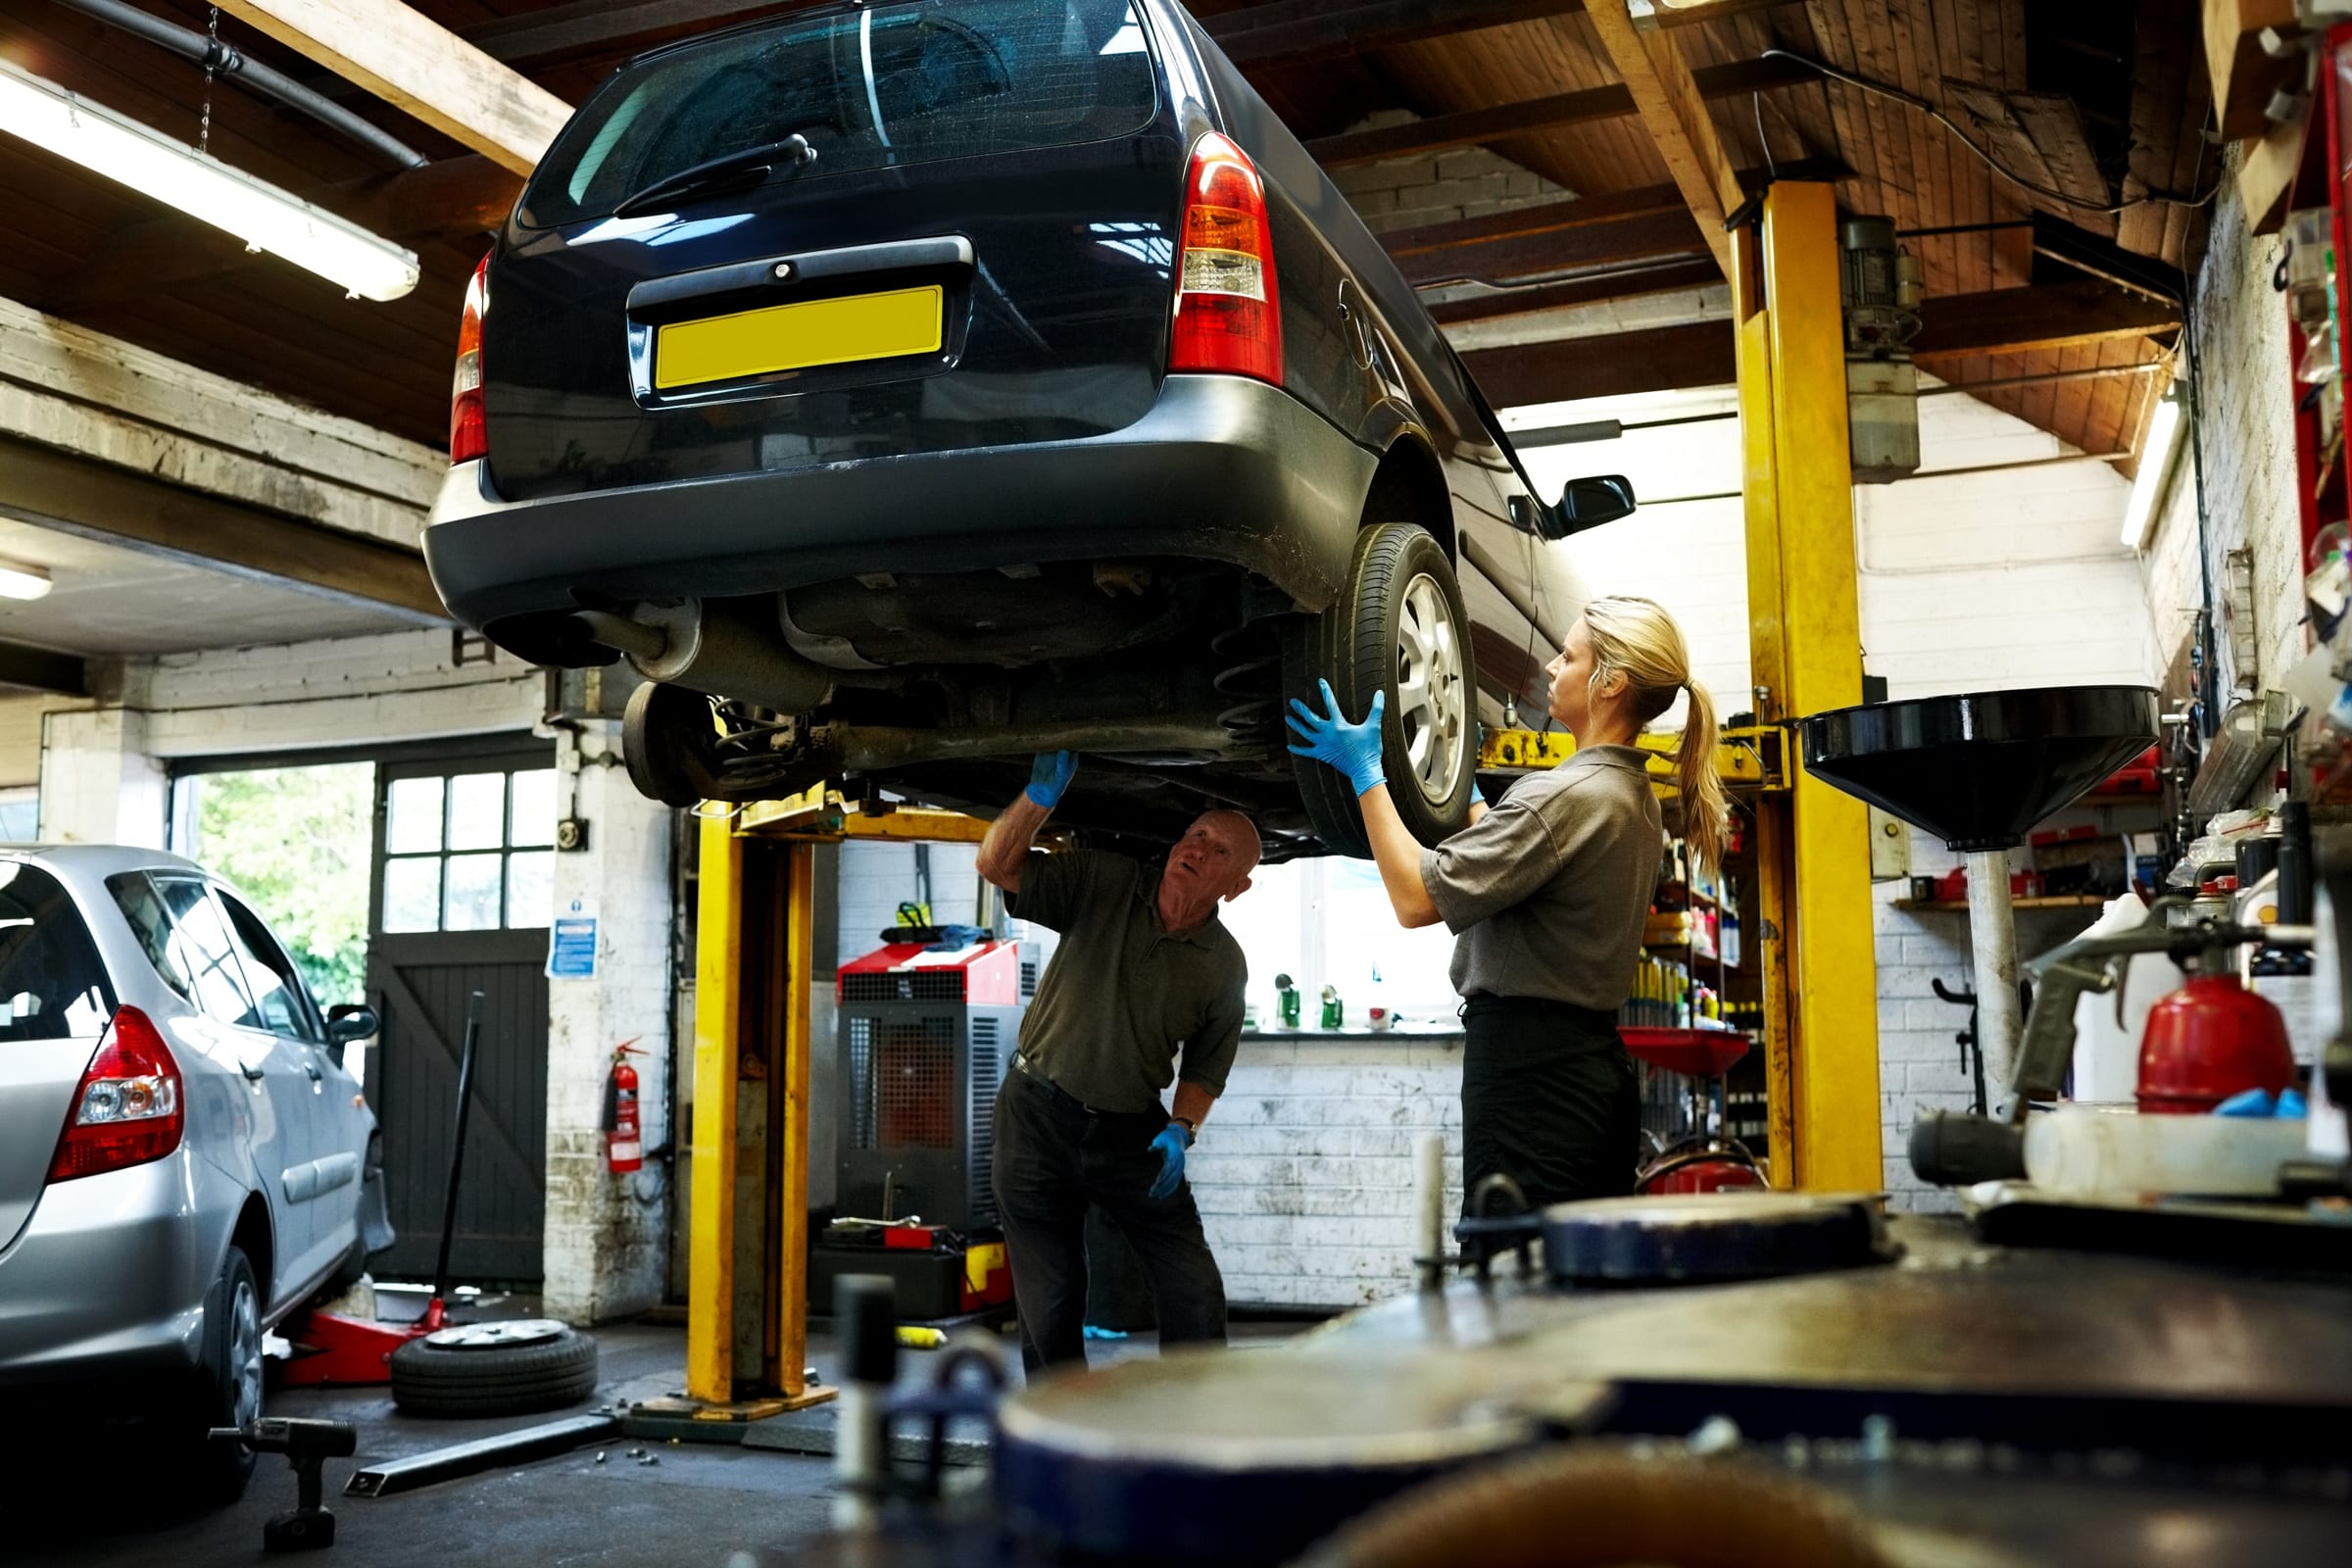 MOT “outdated and should be scrapped” says UK Think Tank